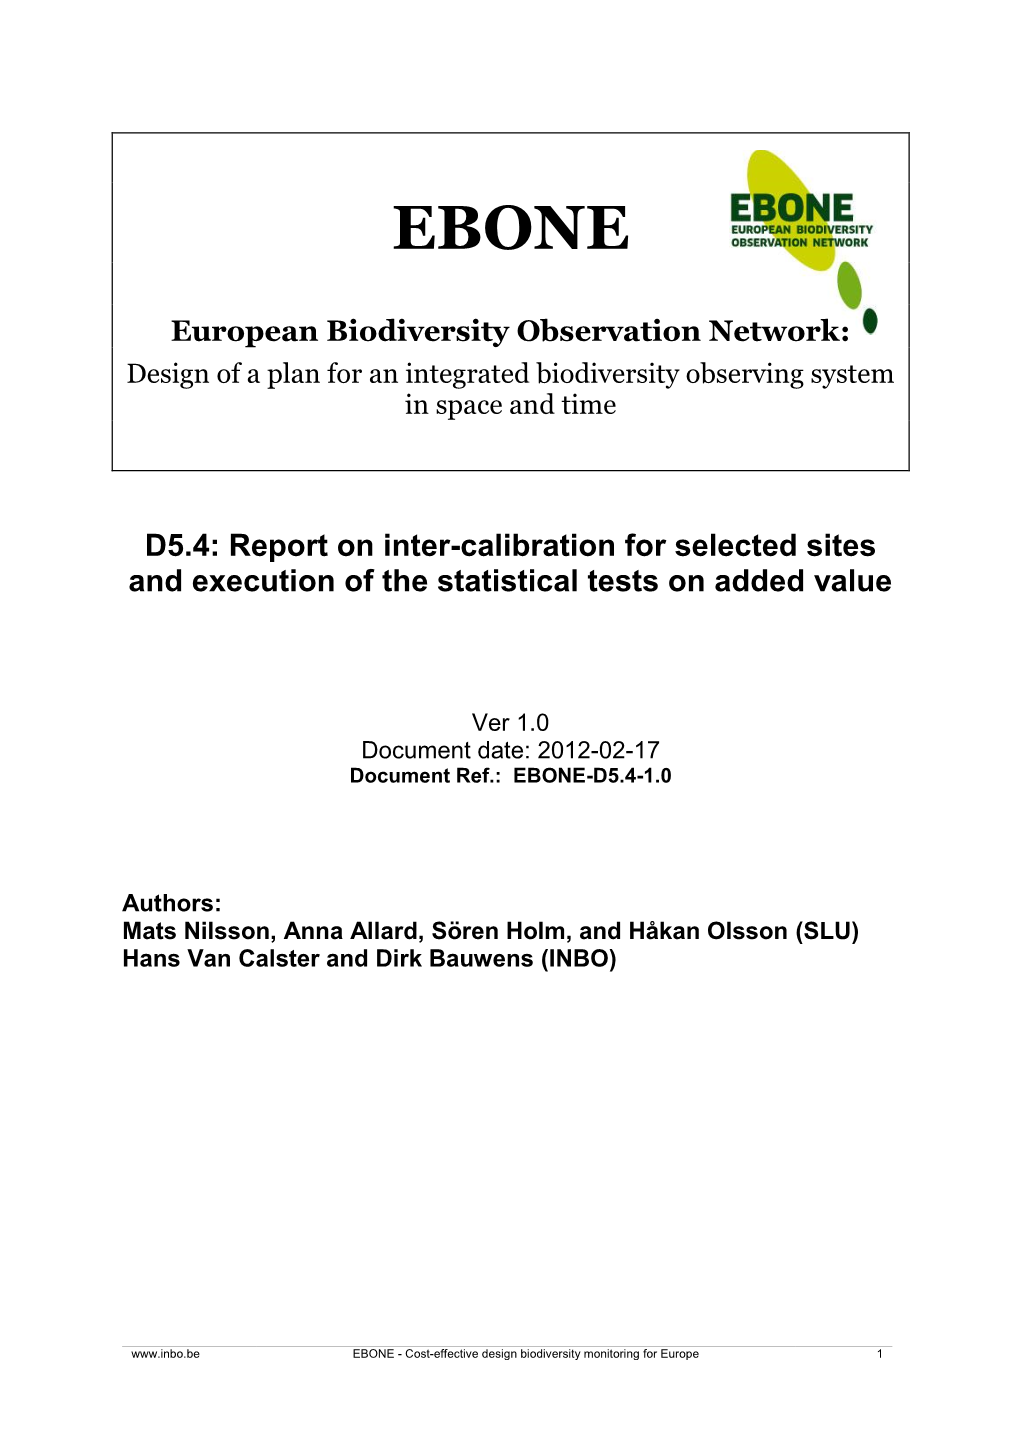 Report on Inter-Calibration for Selected Sites and Execution of the Statistical Tests on Added Value